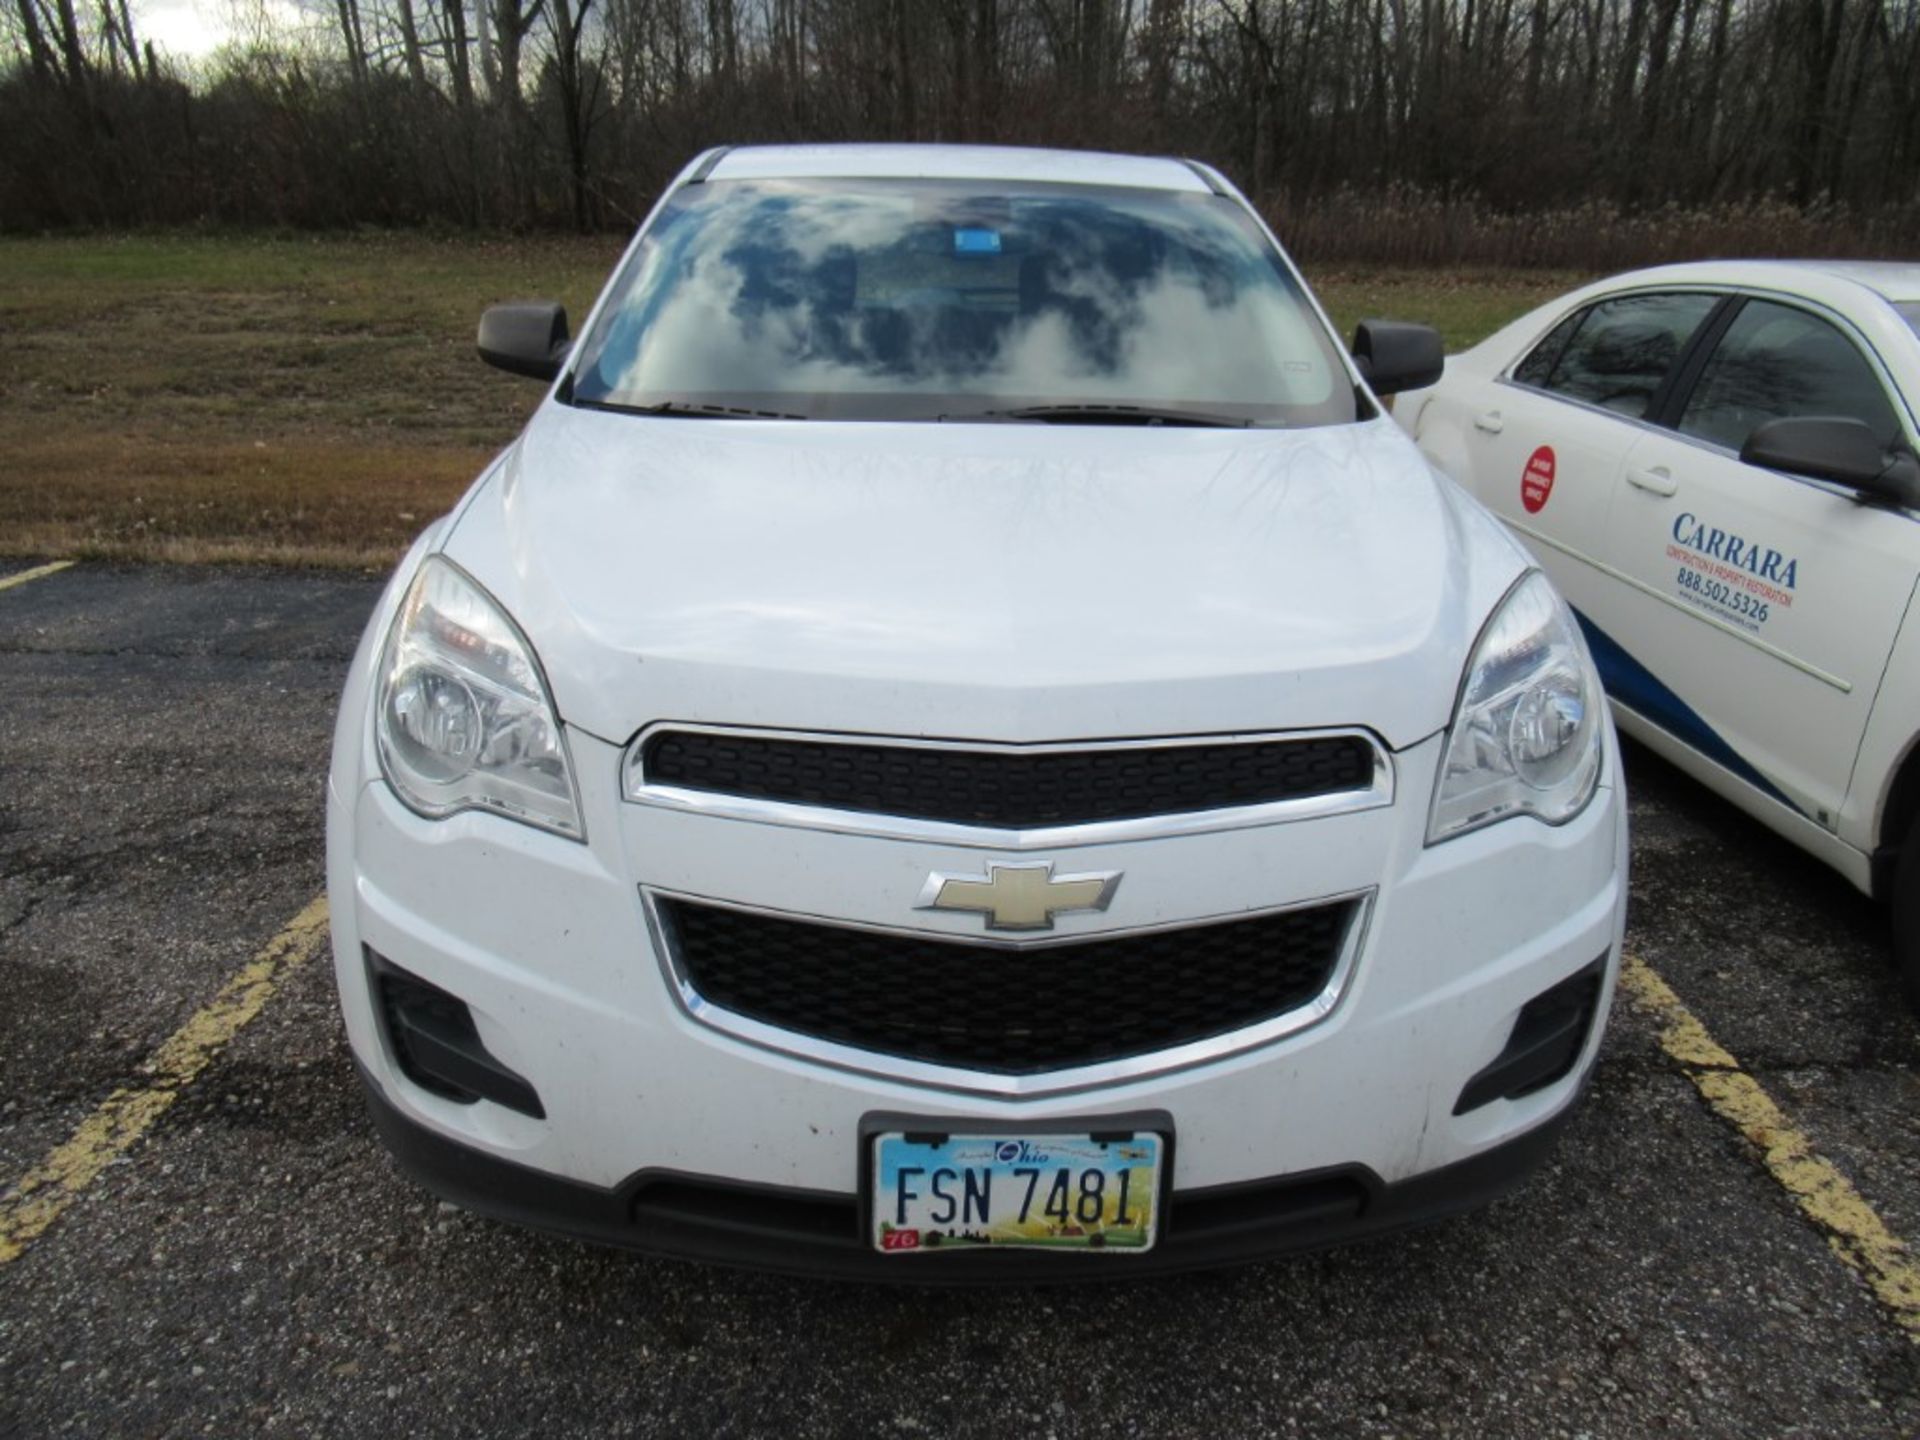 2013 Chevrolet Equinox SUV, VIN 2GNFLCEK2D6152539, Automatic, Cruise Control, AC, PW, PL, PS, AM/FM, - Image 3 of 26